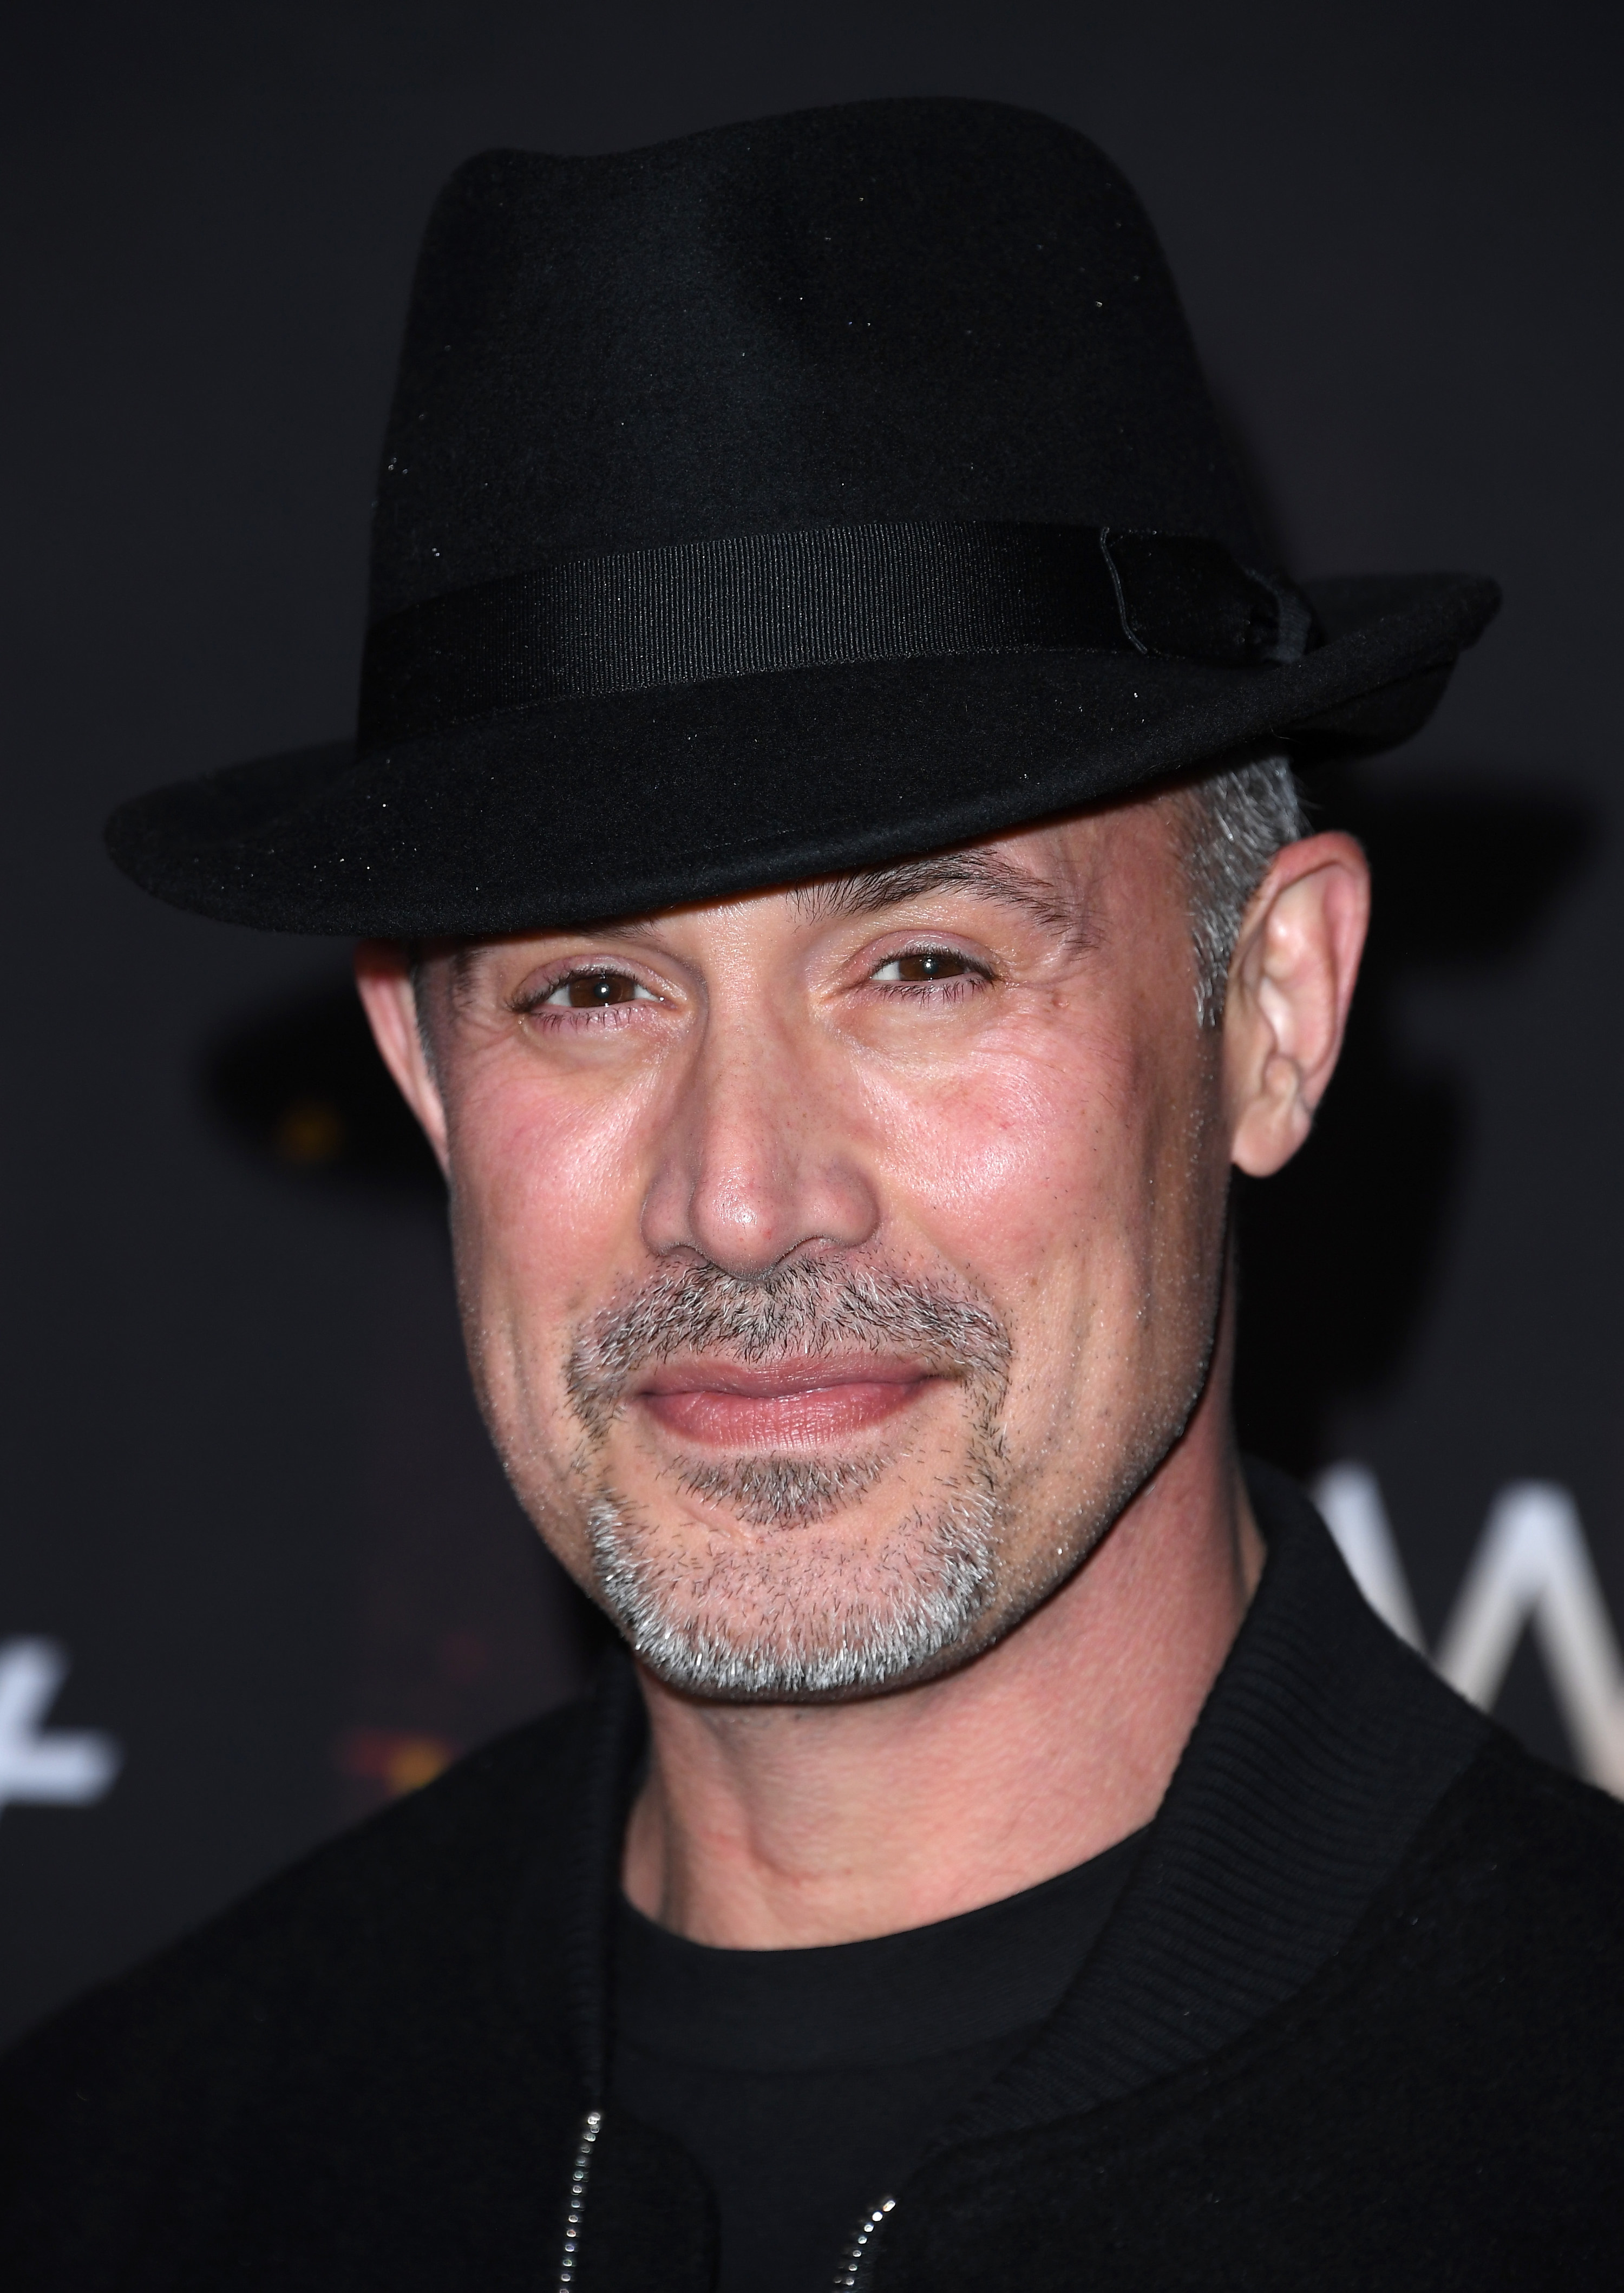 greying goatee and wearing a fedora